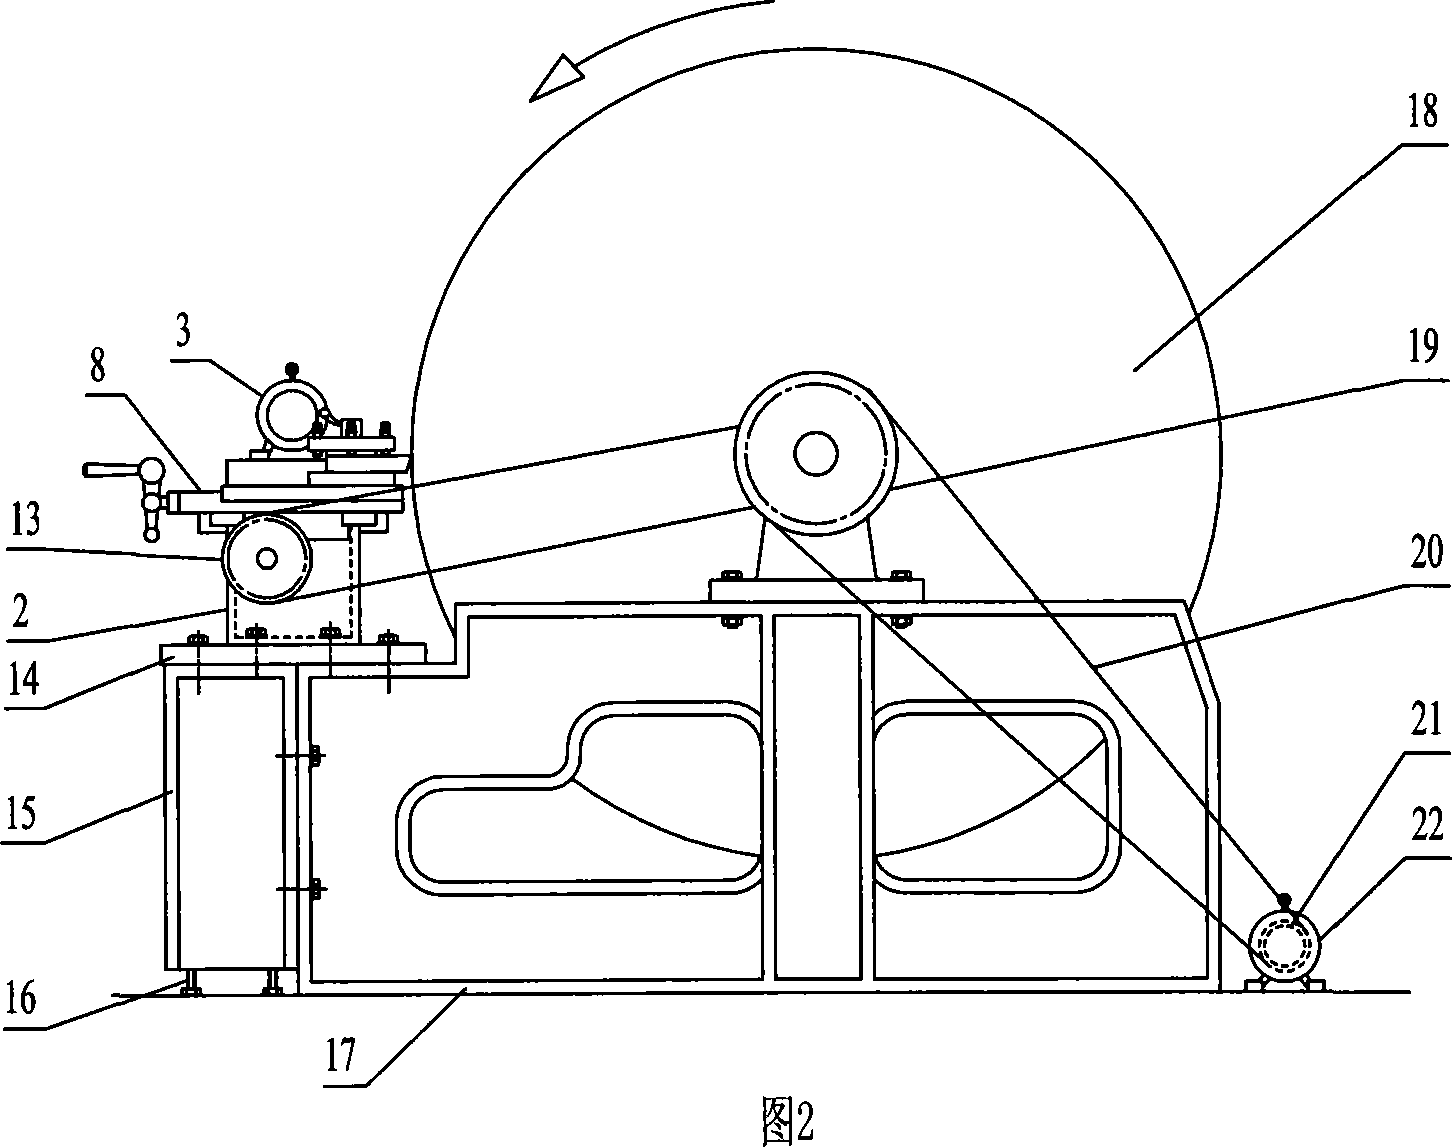 Special movable device for barrel cutting